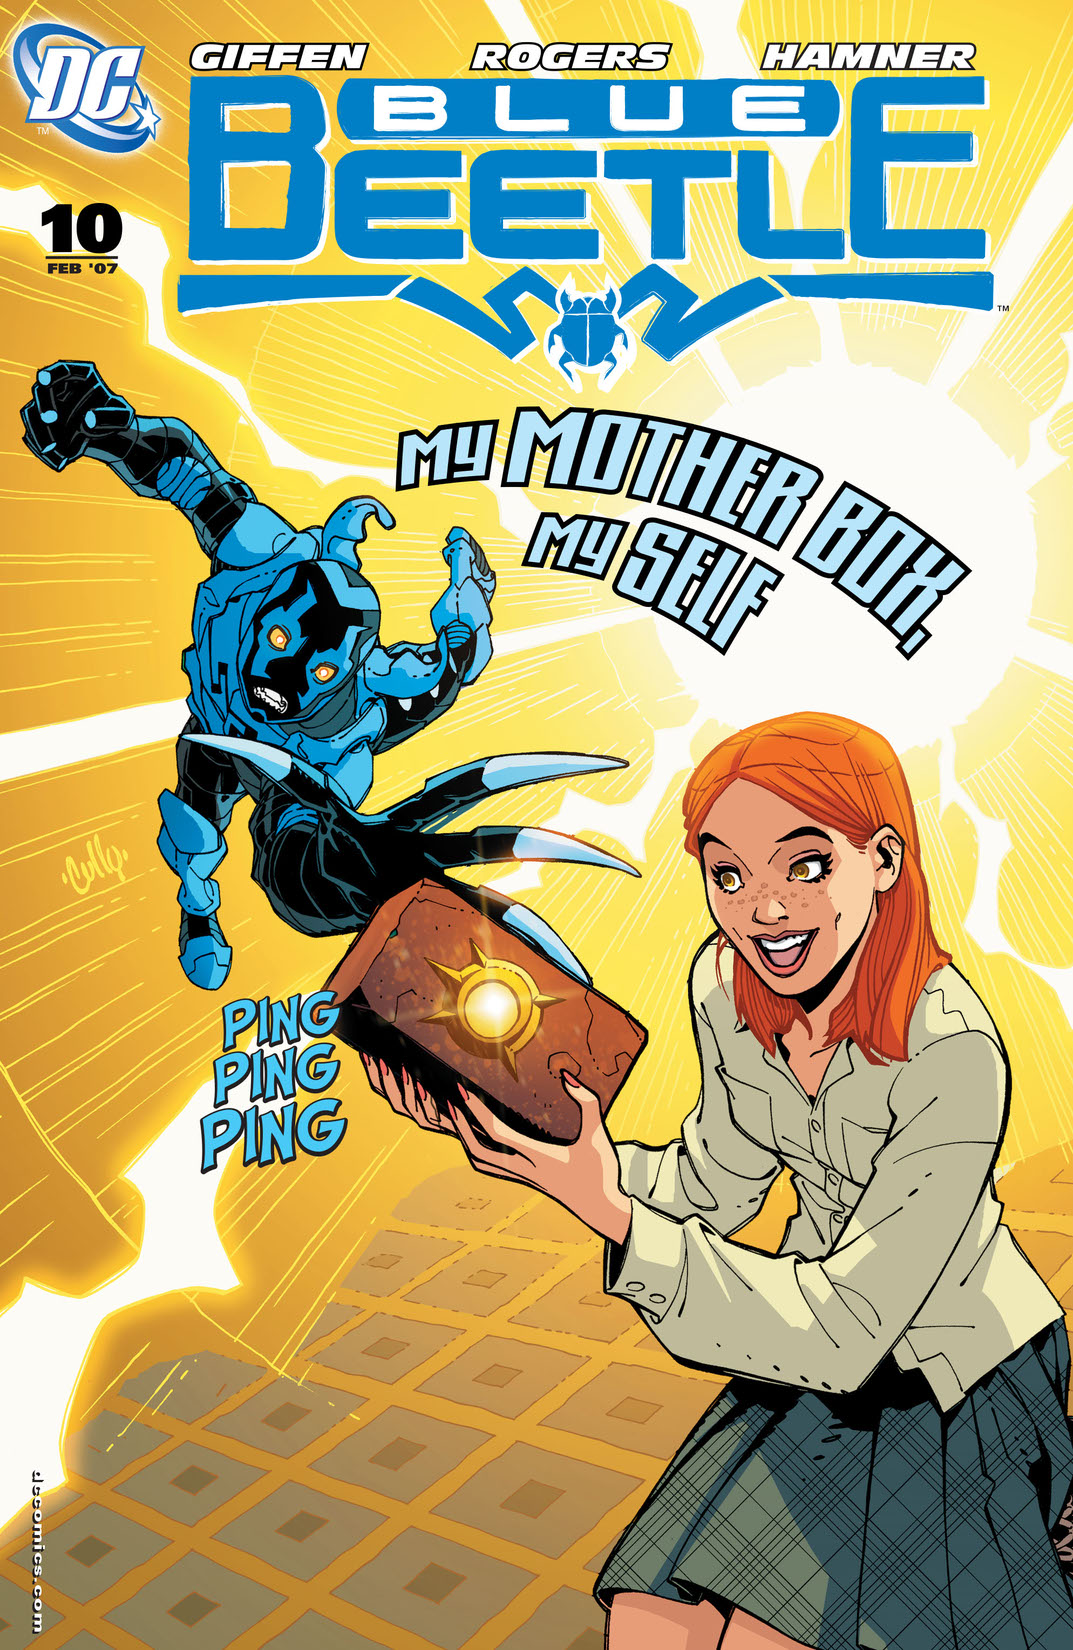 Blue Beetle (2006-) #10 preview images